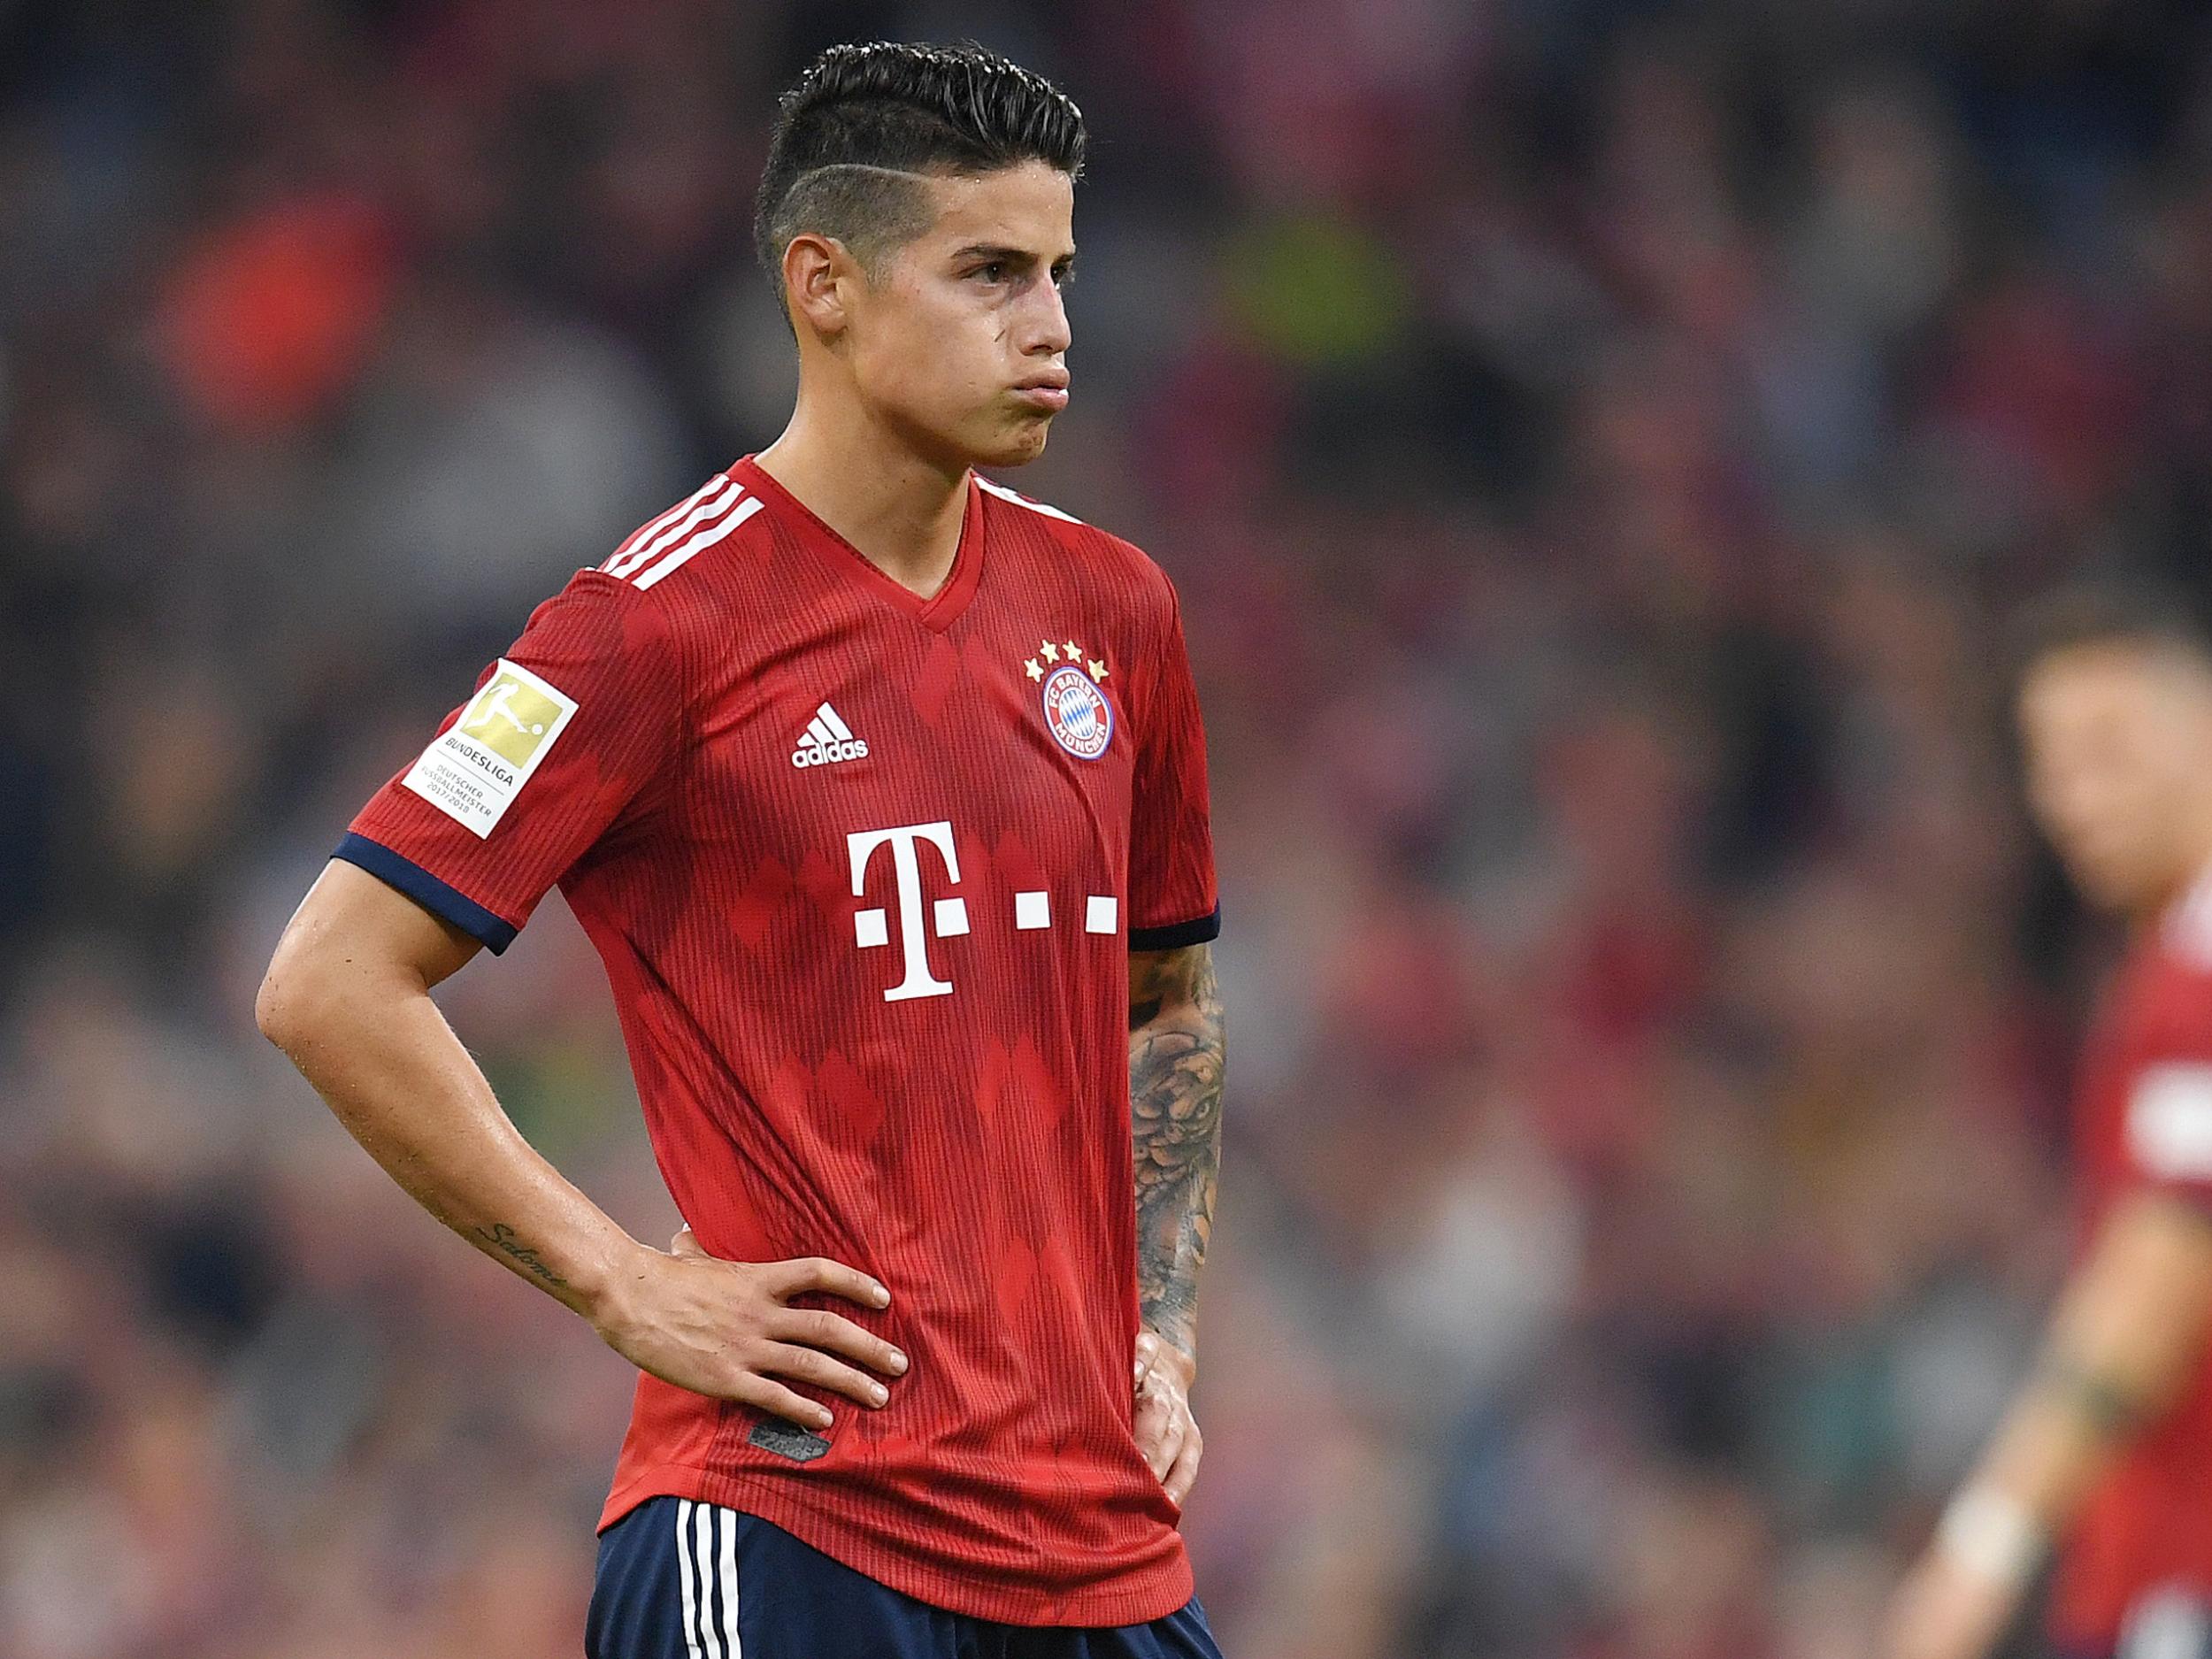 James Rodriguez has questioned the coach’s ability, according to reports